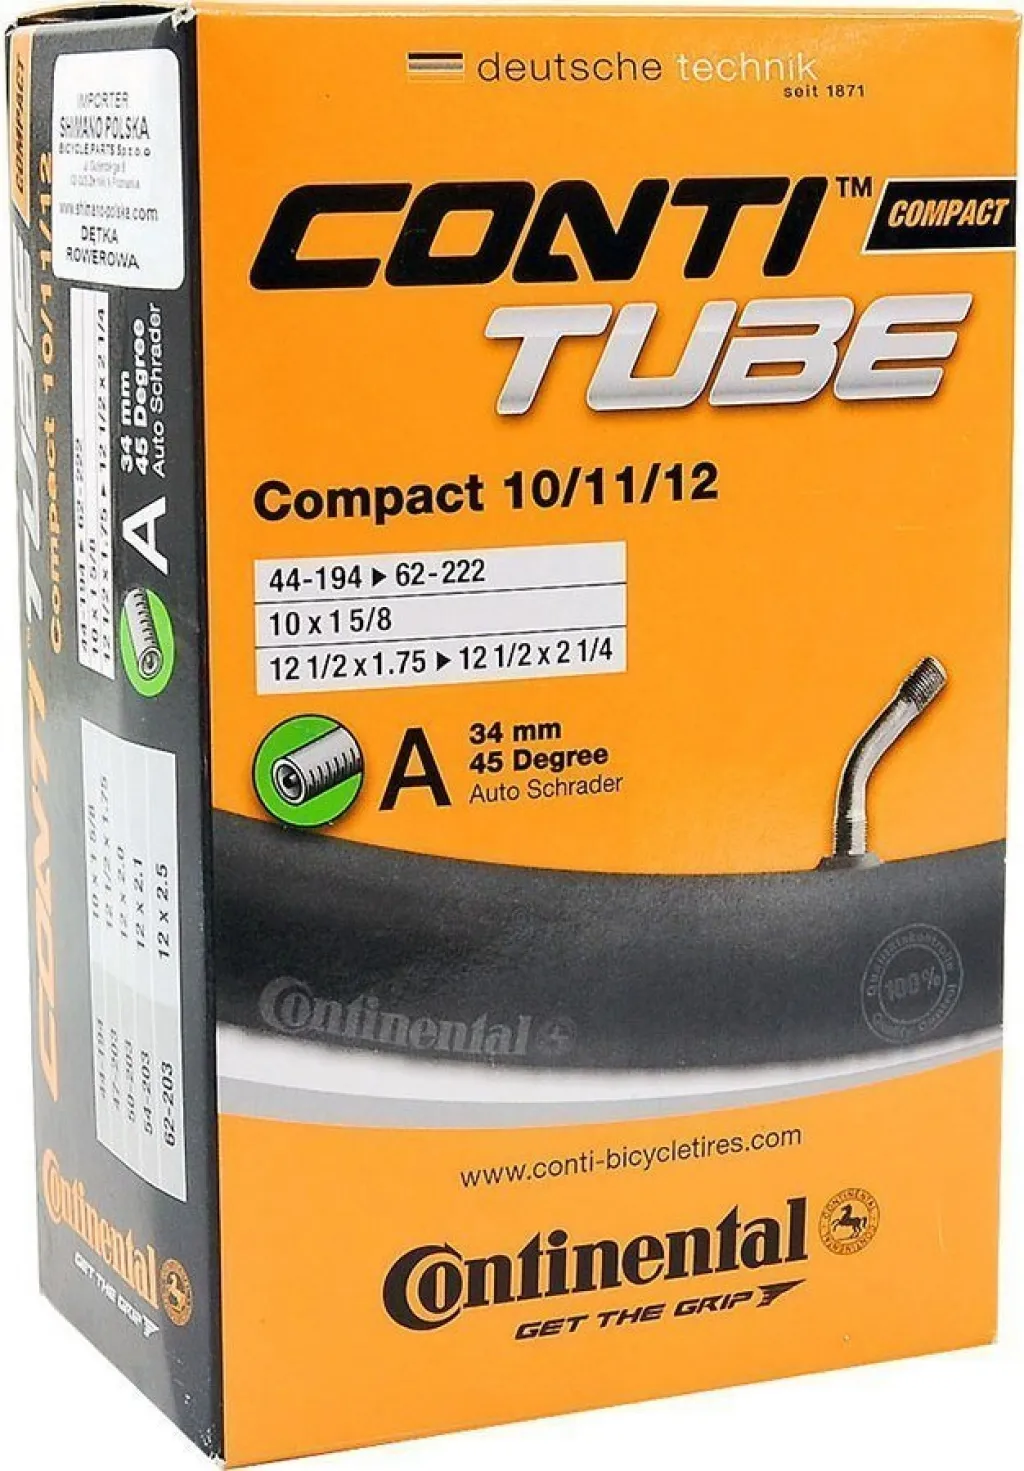 Камера 10/11/12" Continental Compact Tube A34 (44-194->62-222) (100g)